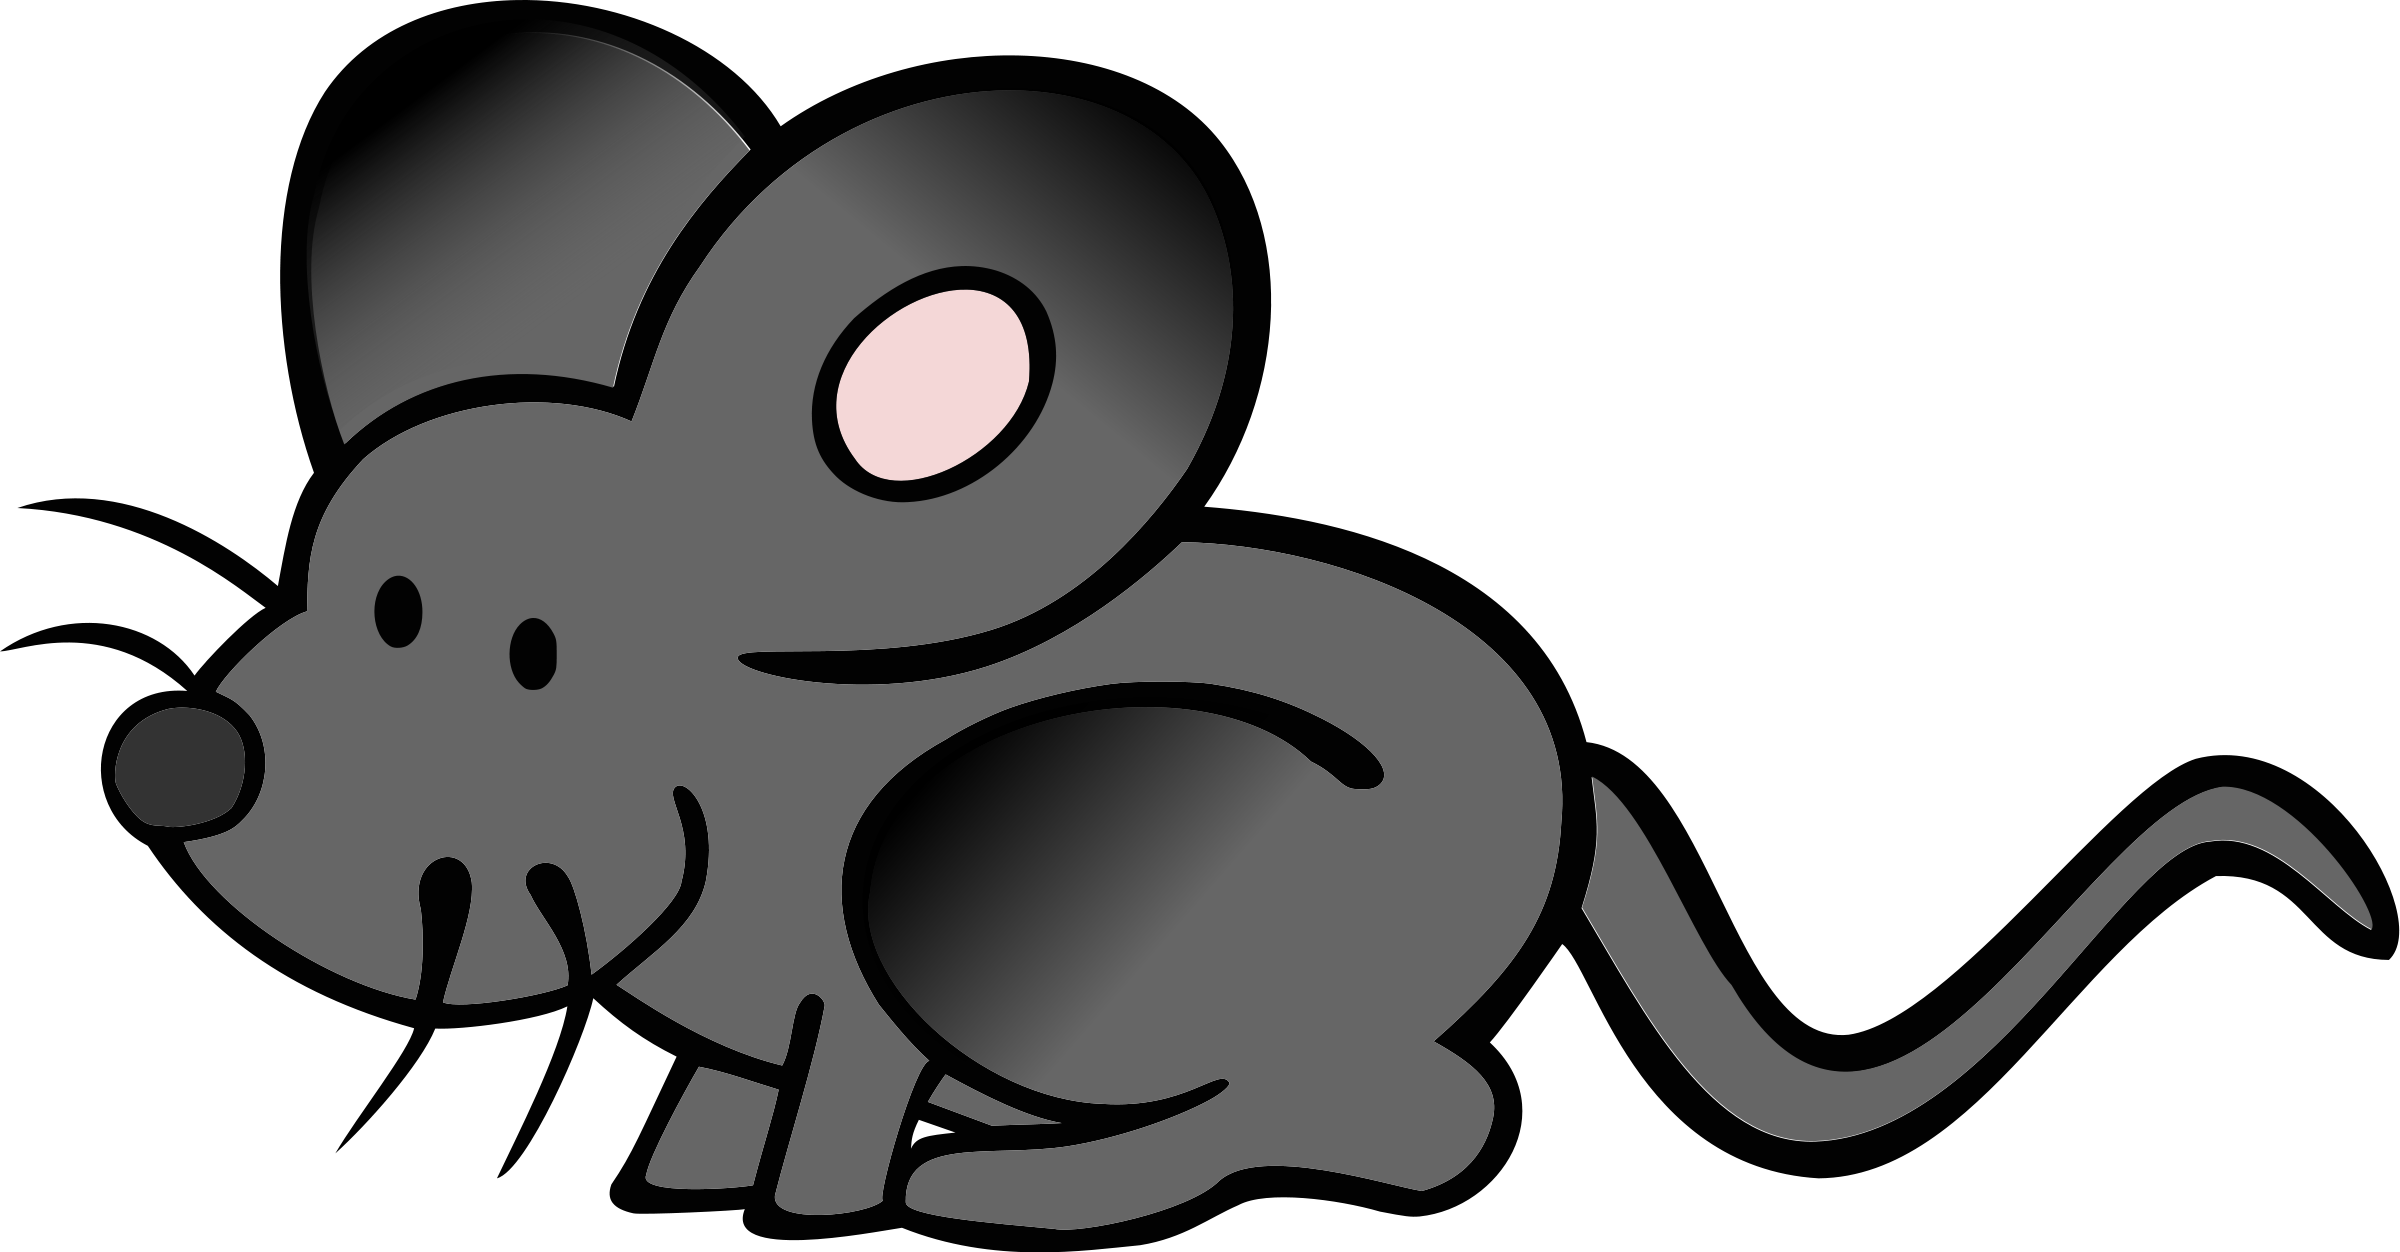 Cartoon Image Of Mouse - ClipArt Best